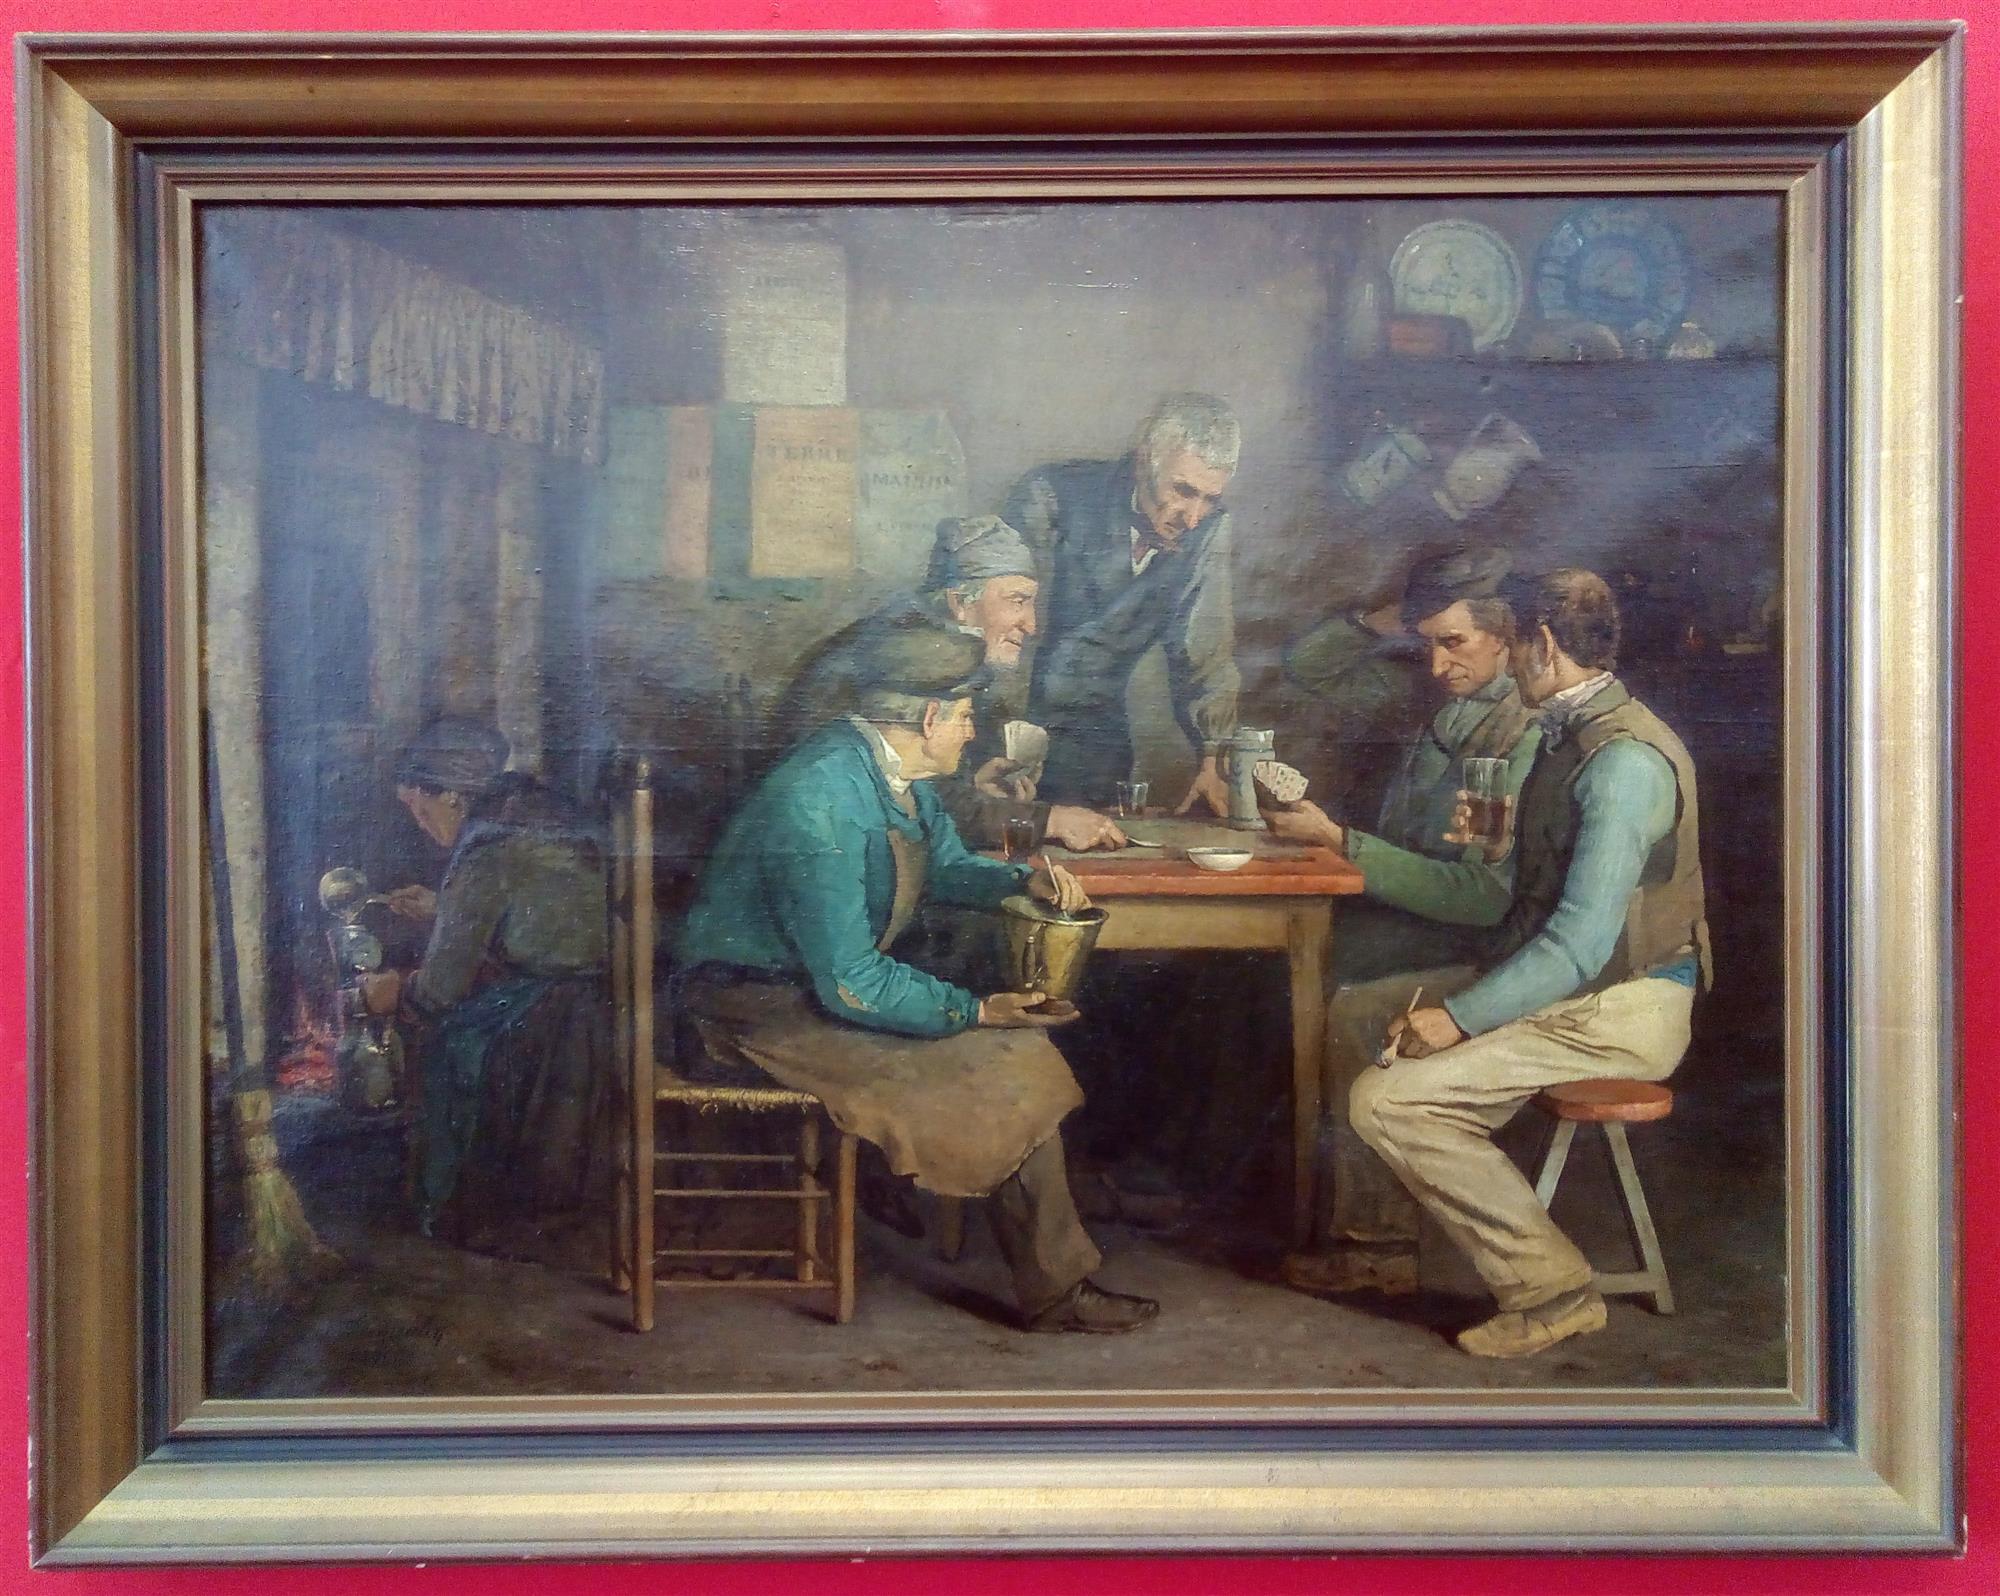 Painting by Jules Denneulin dated 1866